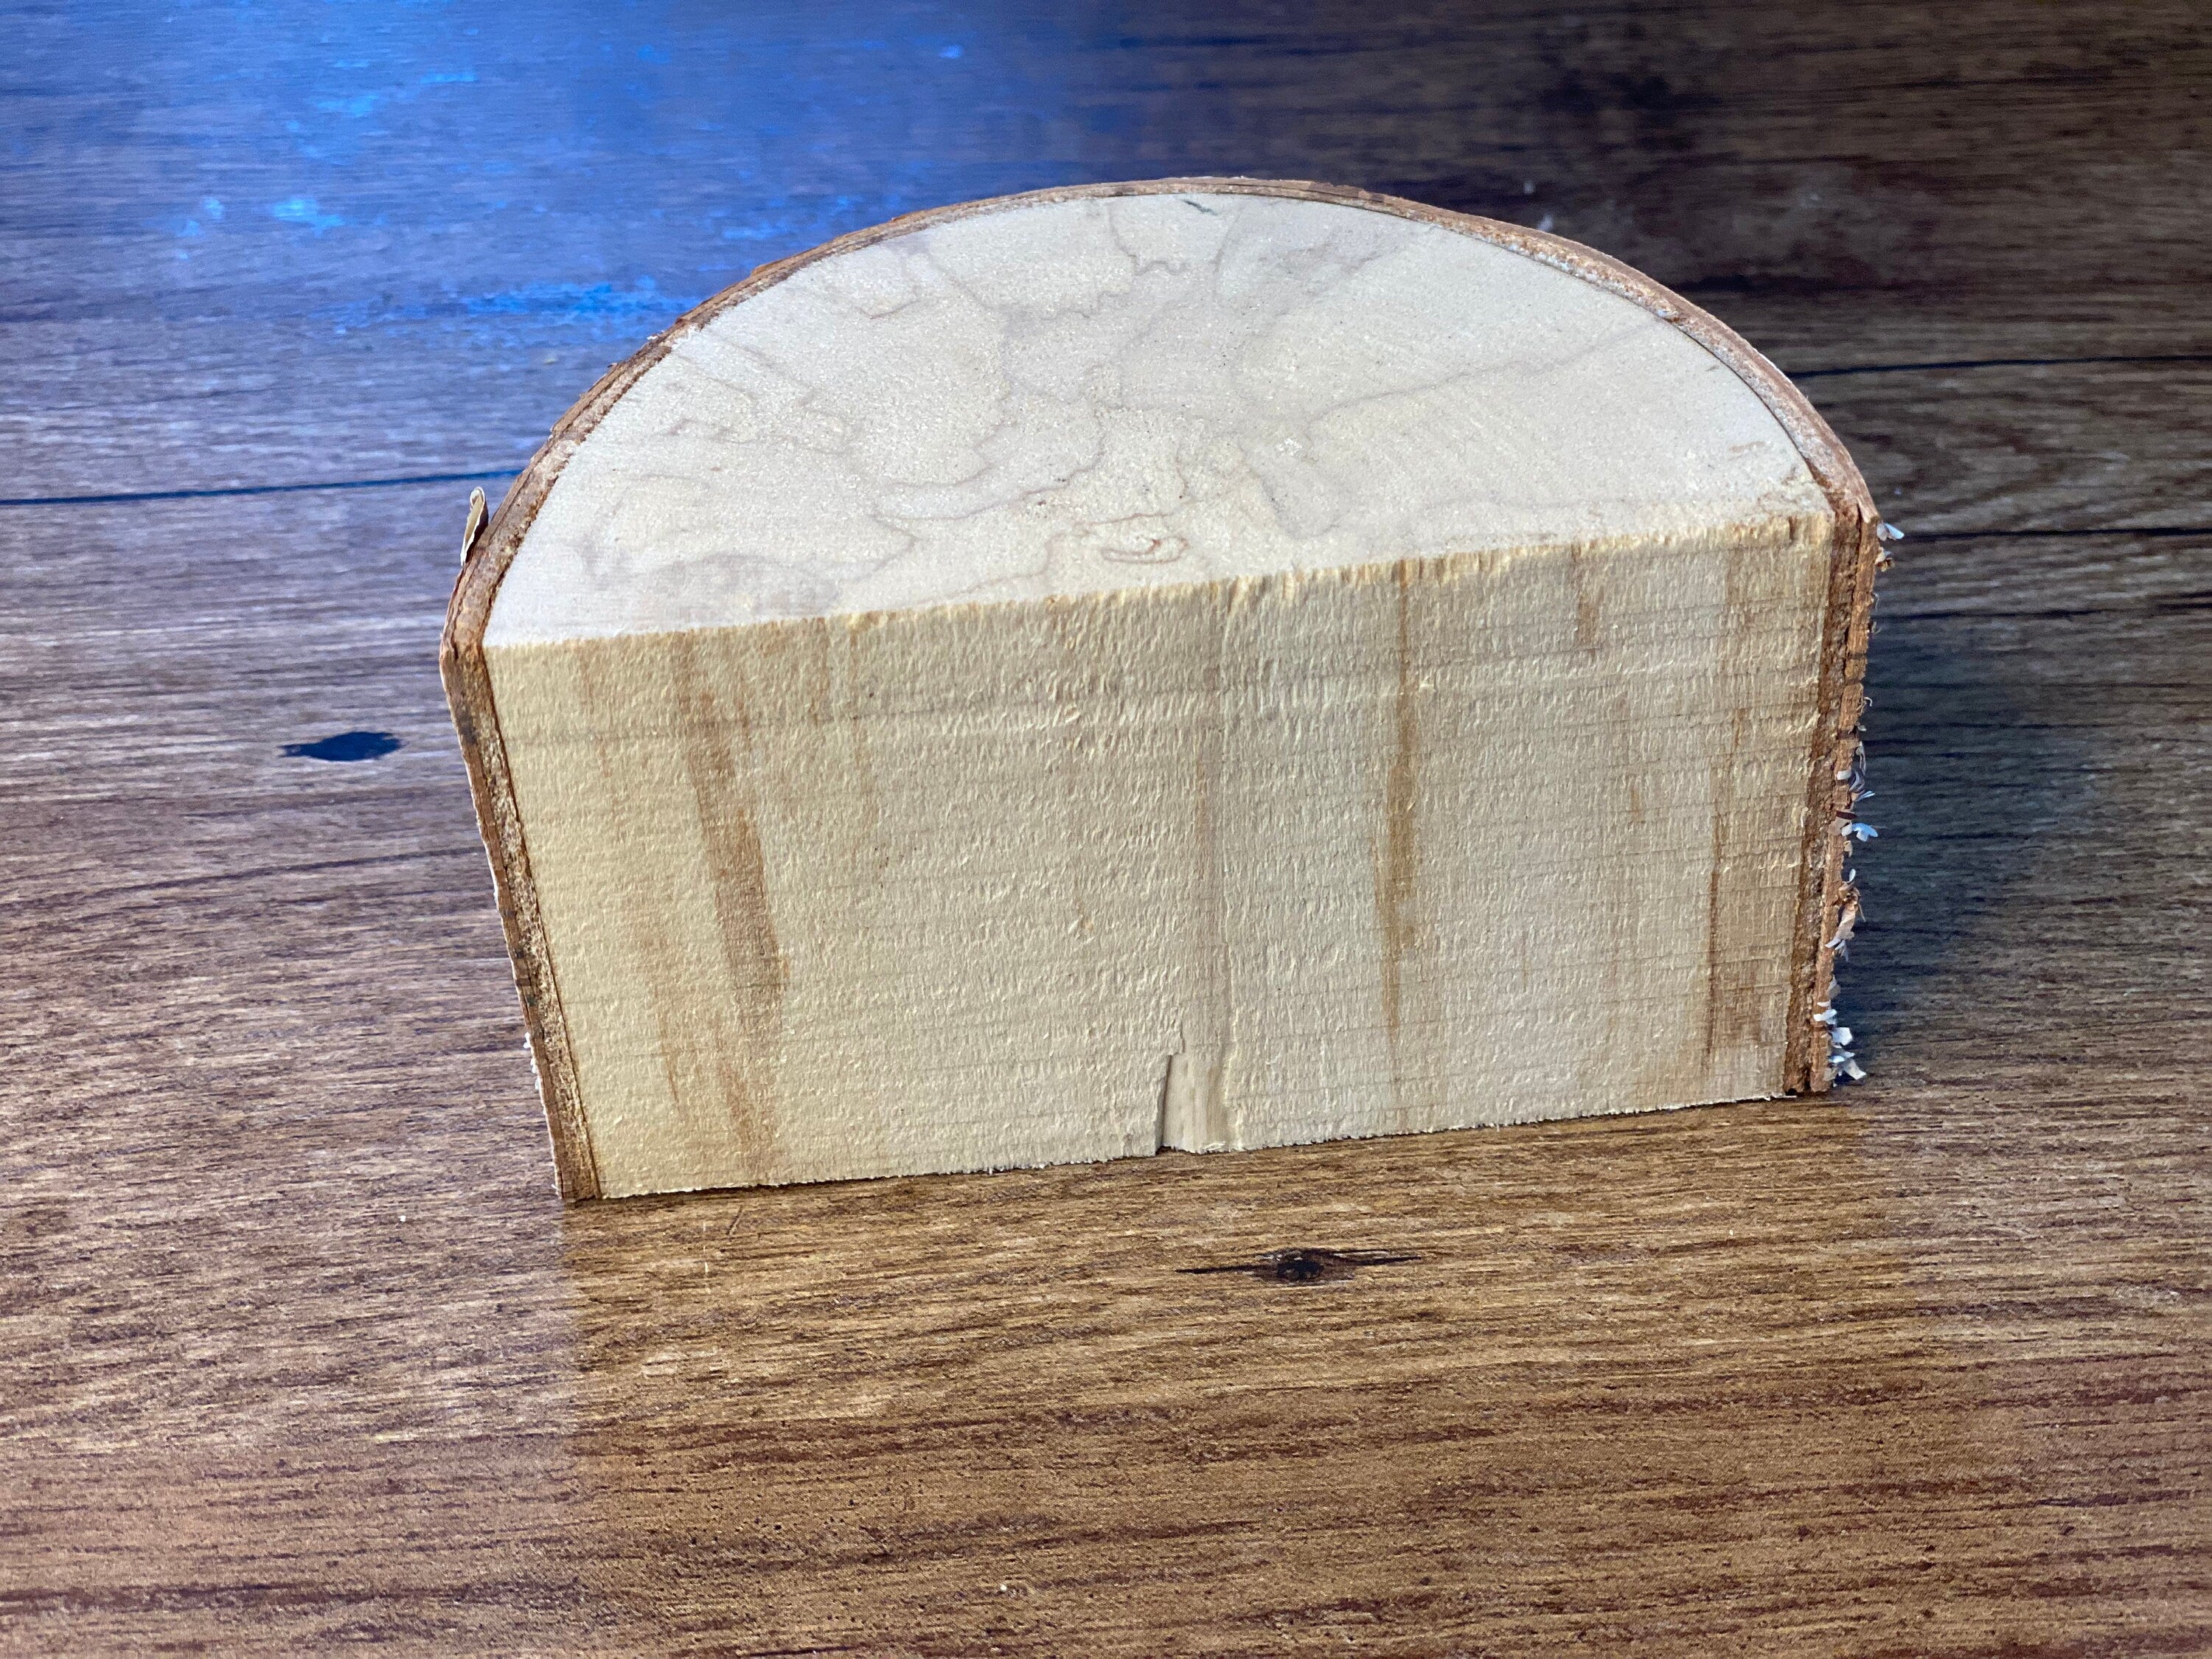 White Birch Wedge, Approximately 4 Inches Long by 2.5 Inches Wide and 2.5 Inches Tall